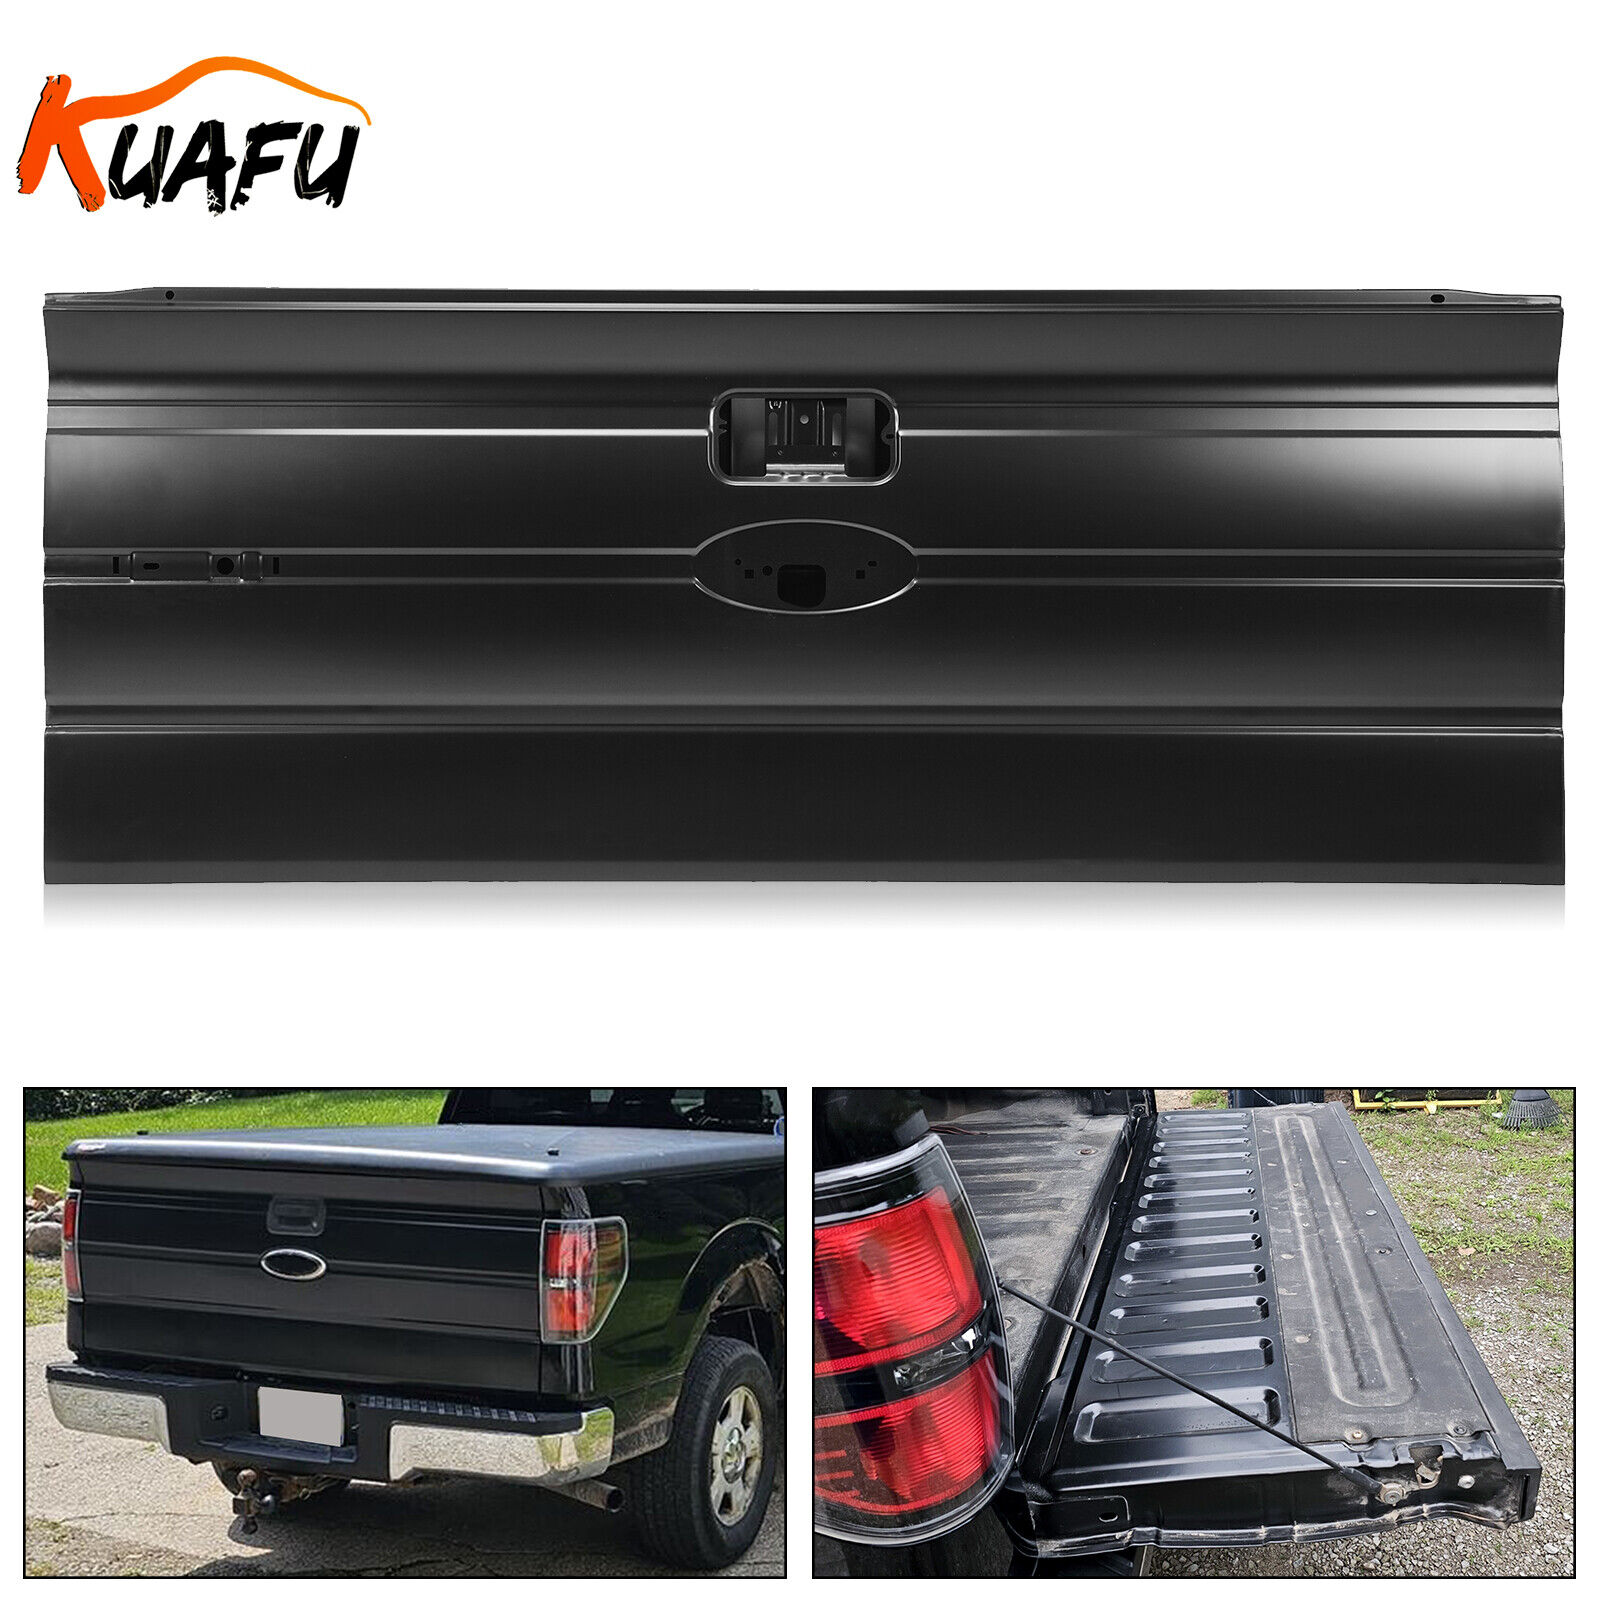 Rear Tailgate for 2009-2014 Ford F150 F-150 Styleside Model 09 10 11 12 13 14